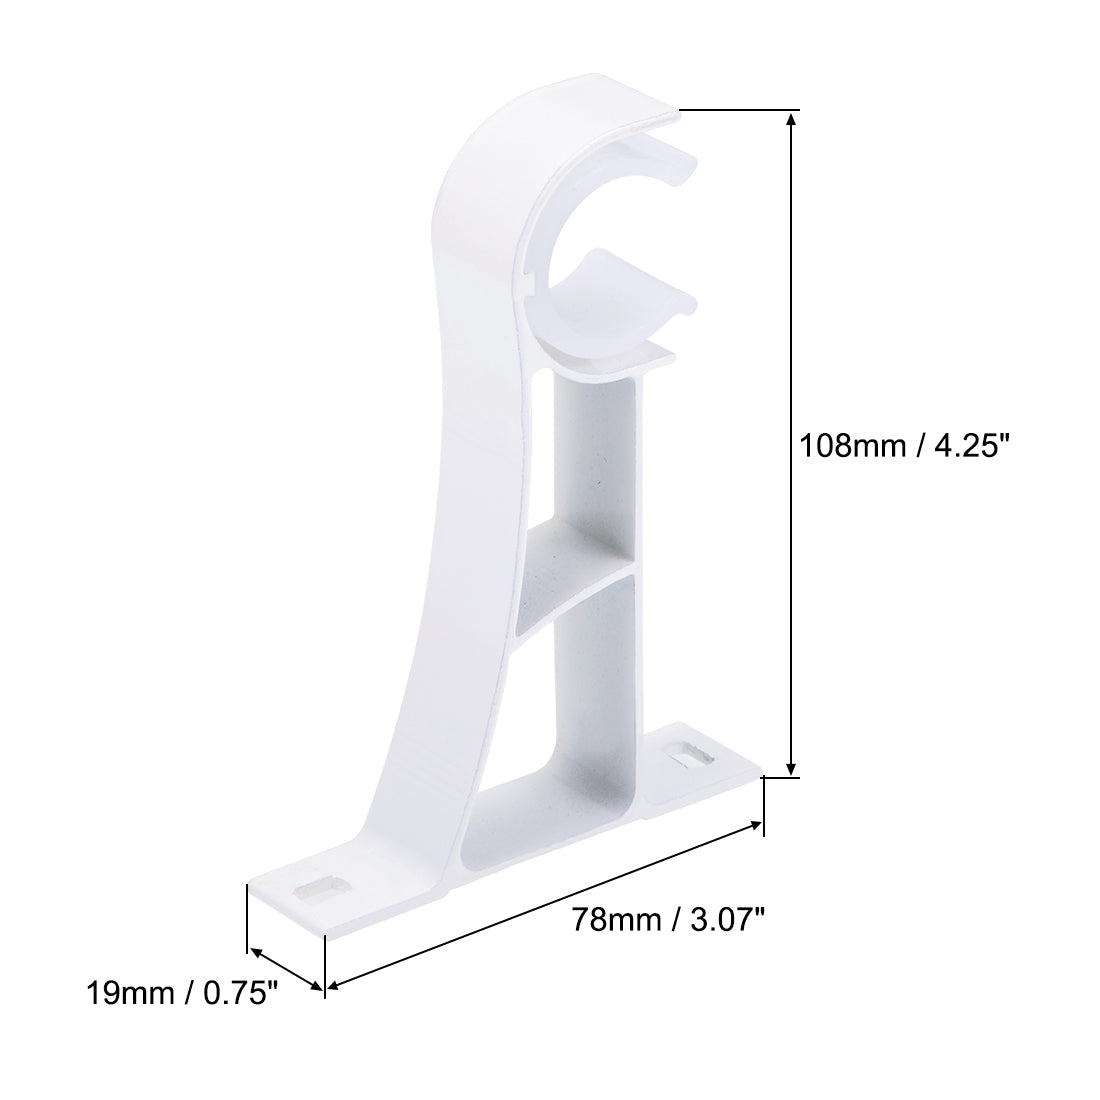 uxcell Uxcell Curtain Rod Bracket Aluminum Alloy Single Holder Support for 24mm Drapery Rod, 108 x 78 x 19mm White 6Pcs